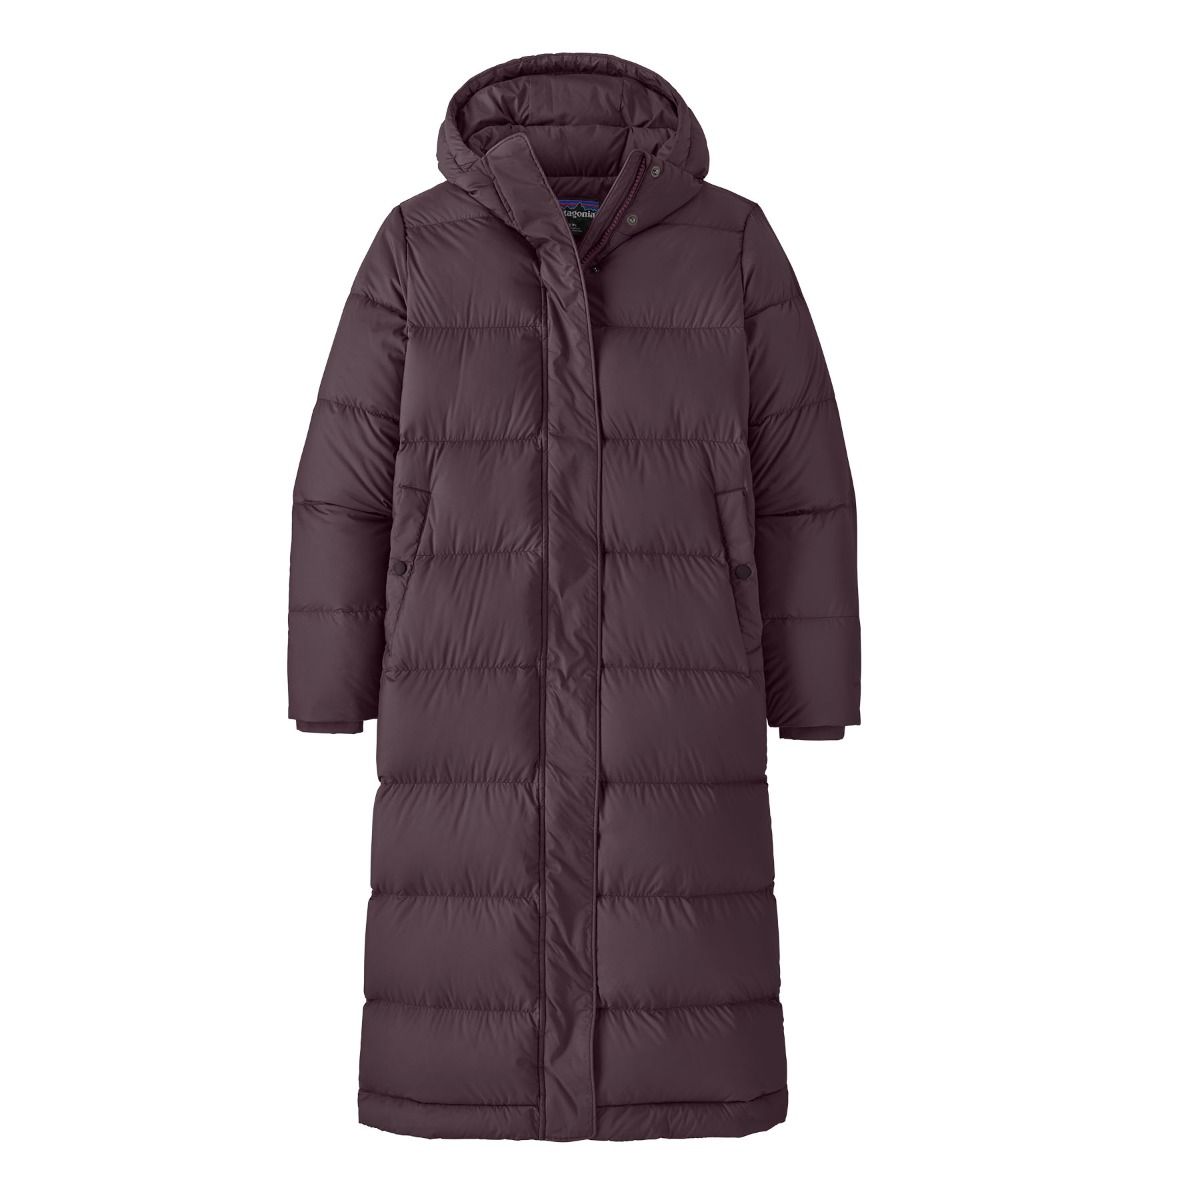 Patagonia - W's Silent Down Long Parka